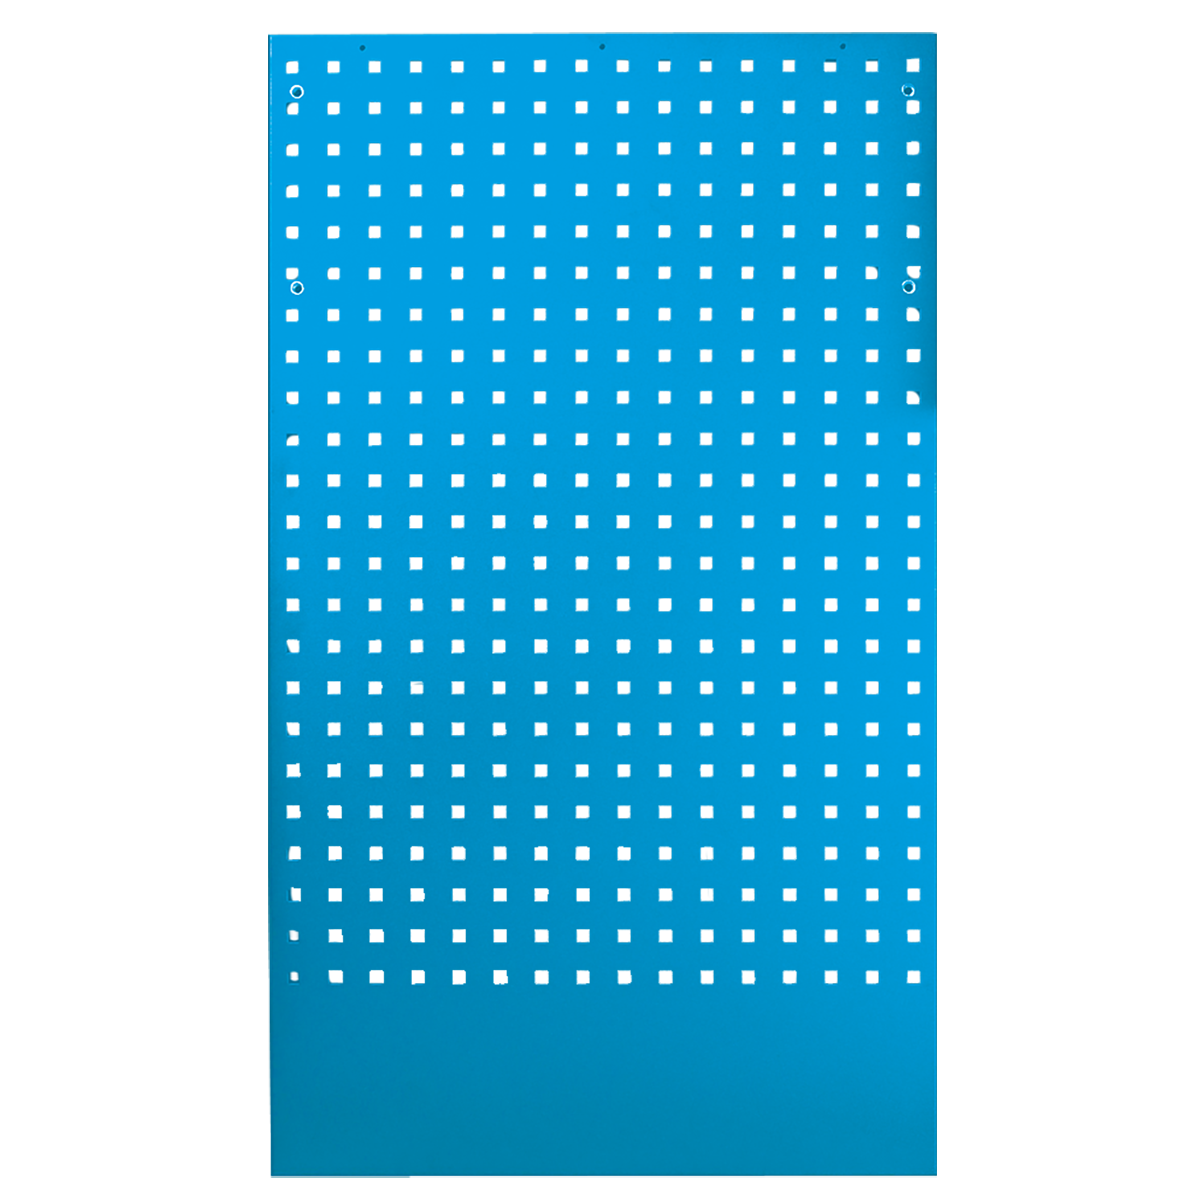 Tool panel - RAL 5012 blue painting